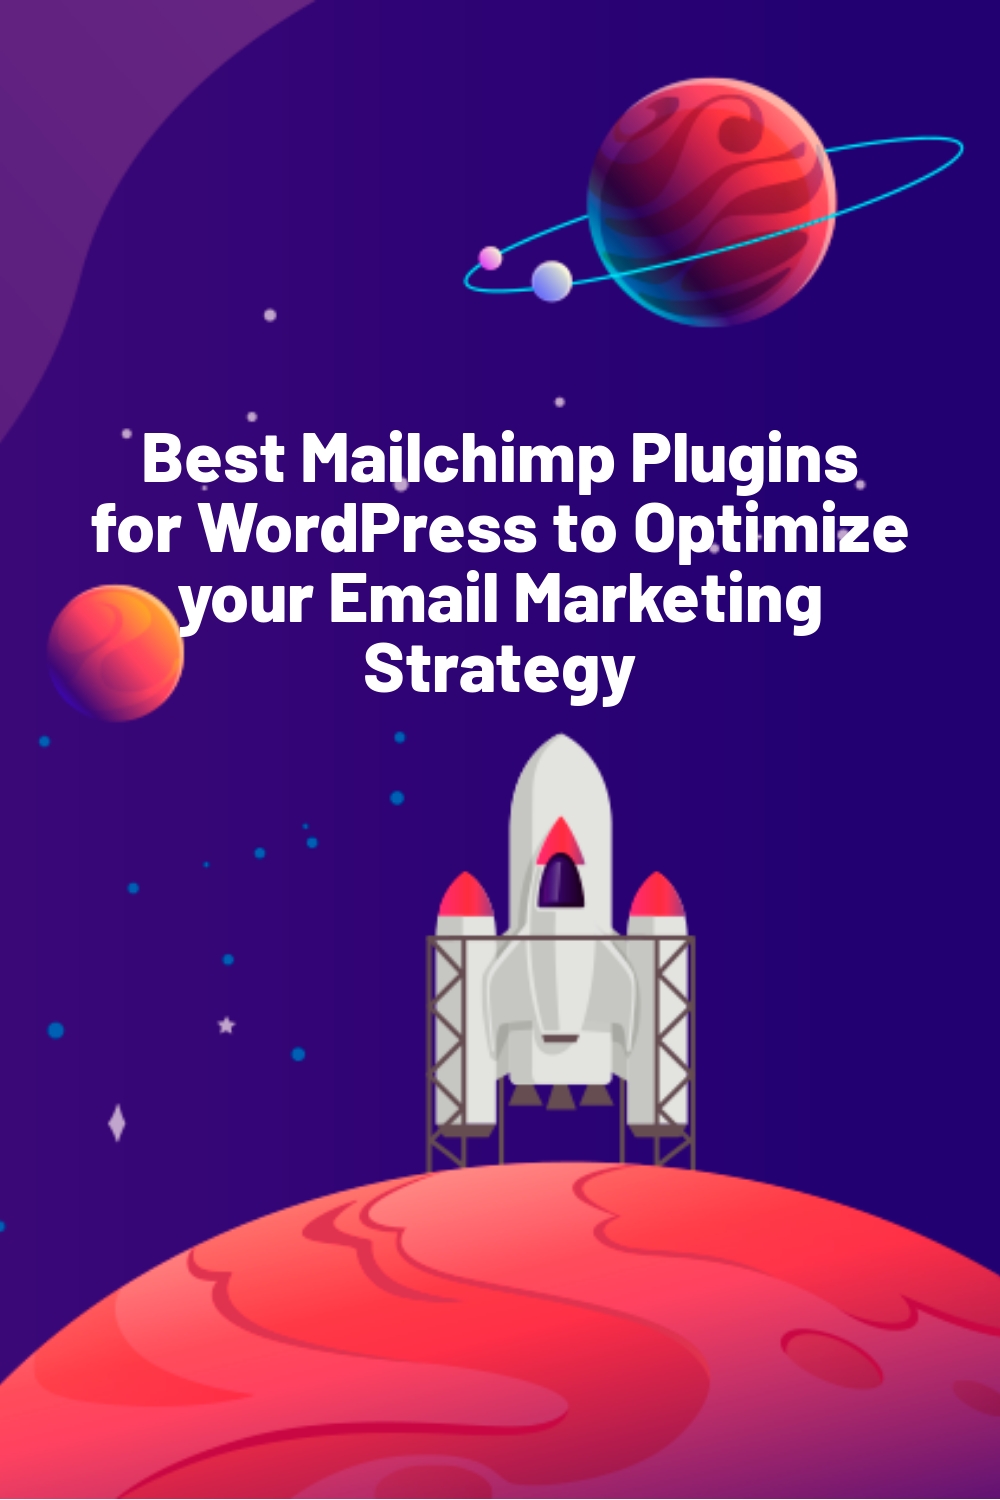 Best Mailchimp Plugins for WordPress to Optimize your Email Marketing Strategy